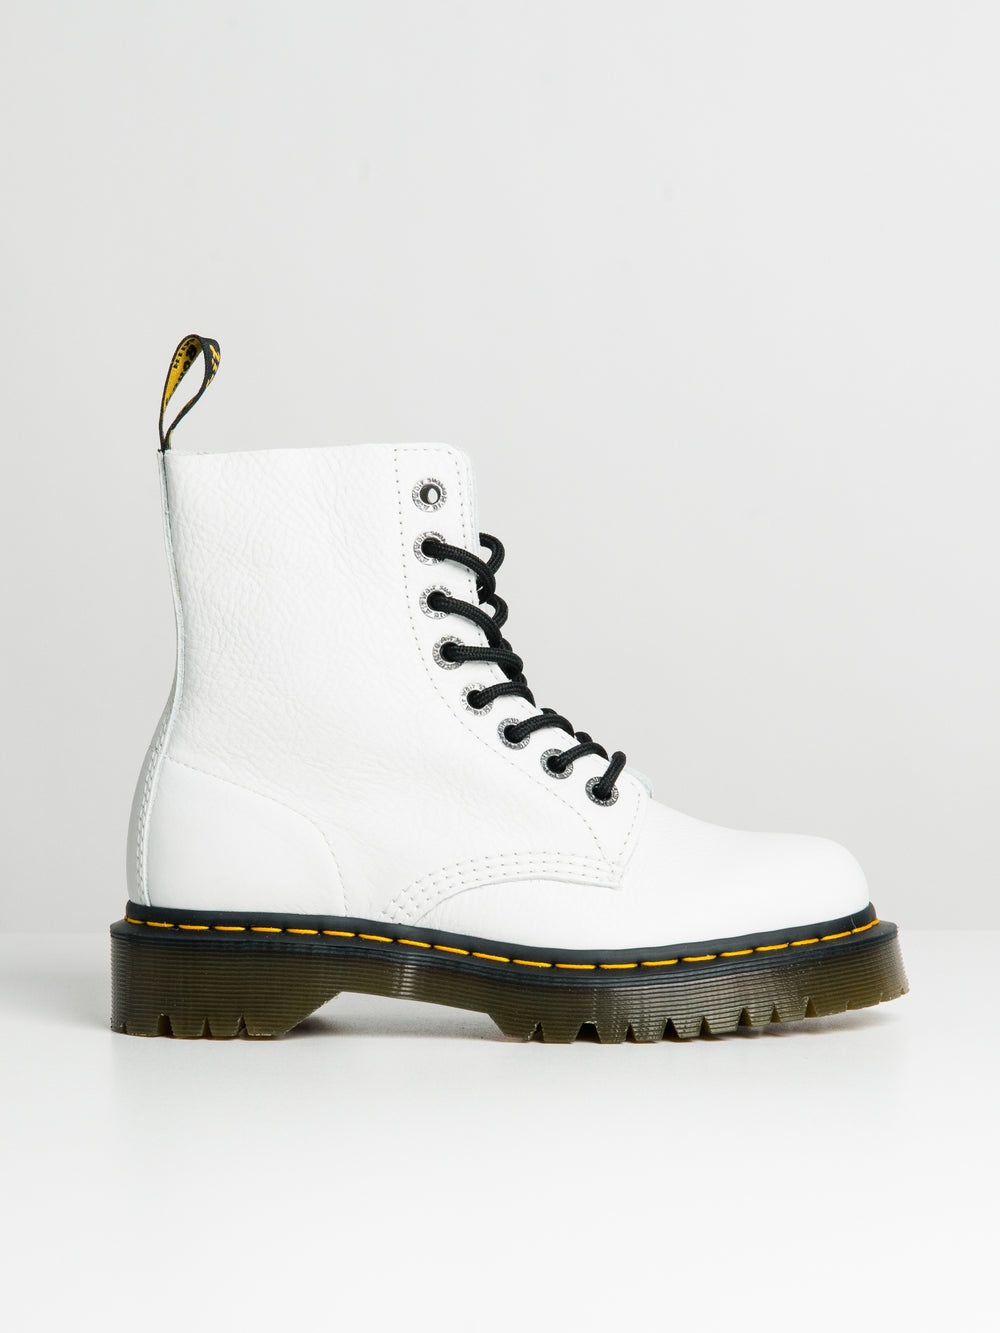 WOMENS DR MARTENS 1460 PASCAL BEX LACE UP BOOTS - CLEARANCE